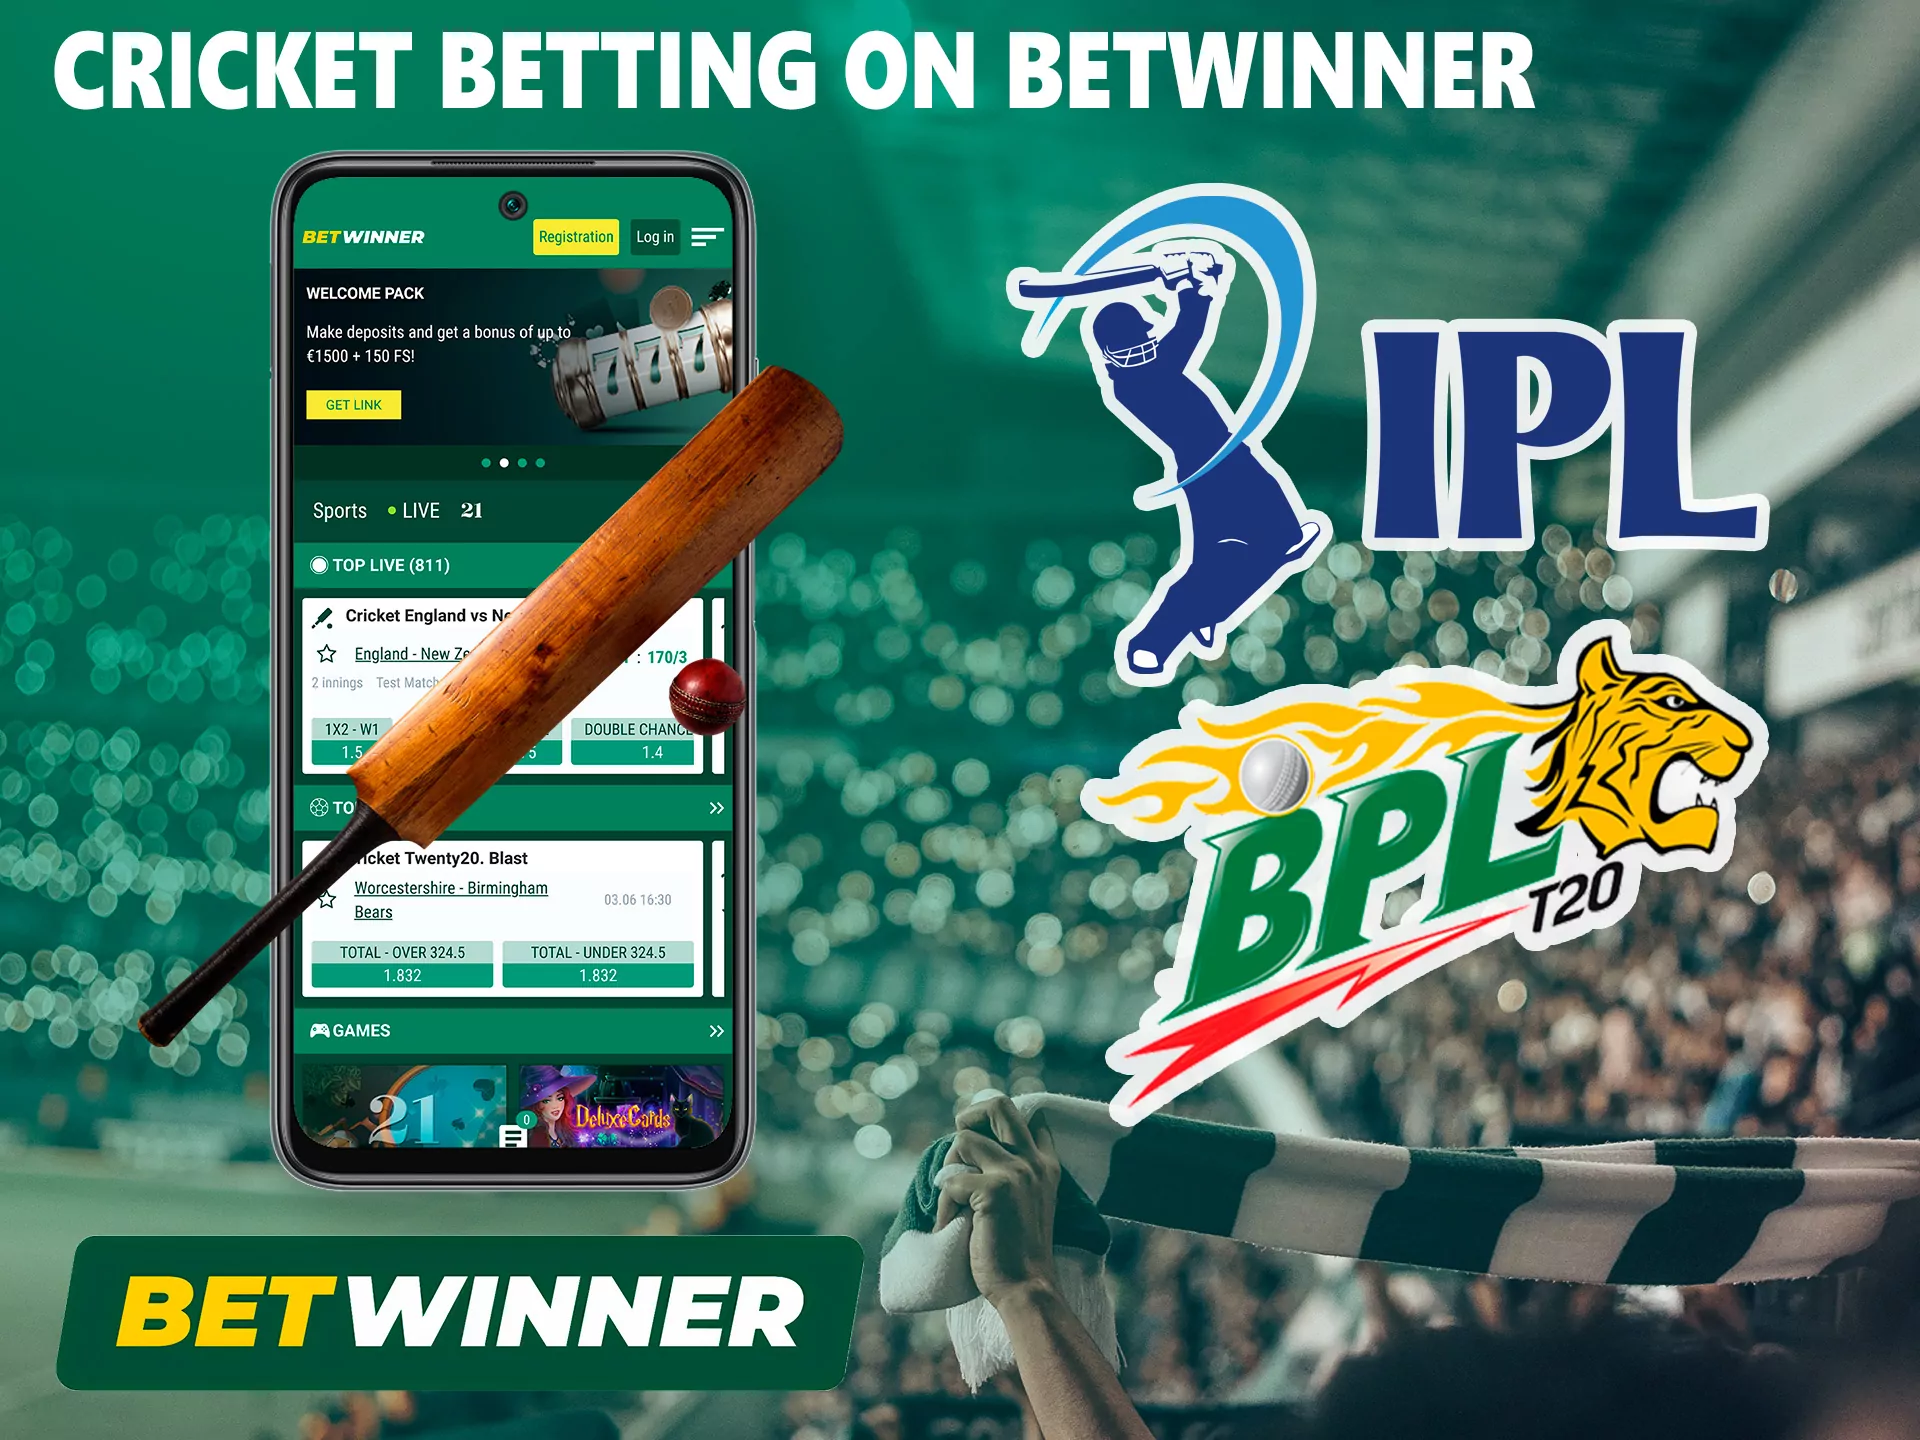 In this section you can bet on Total, Handicap, Match Winner, Correct score, and other types of betting at Betwinner.